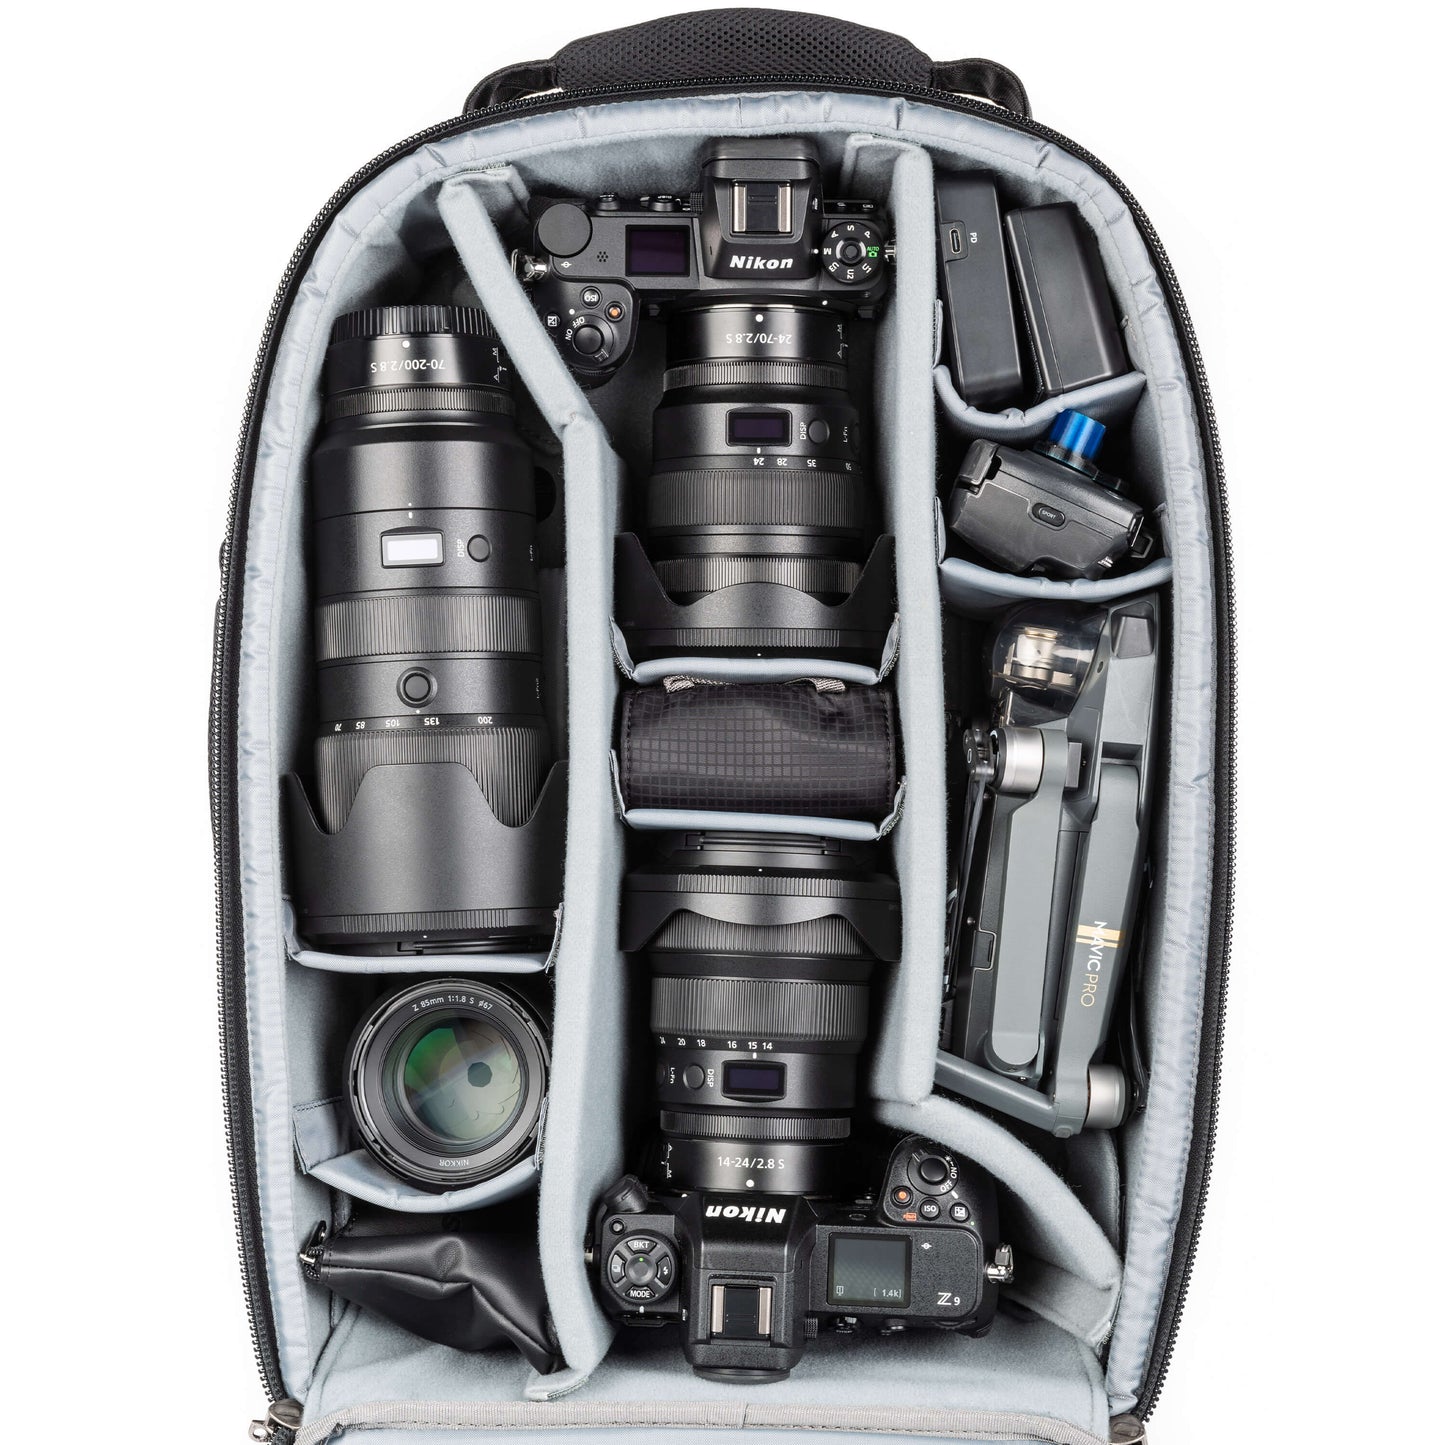 Think Tank - Best camera bags, shoulder bags, backpacks, and